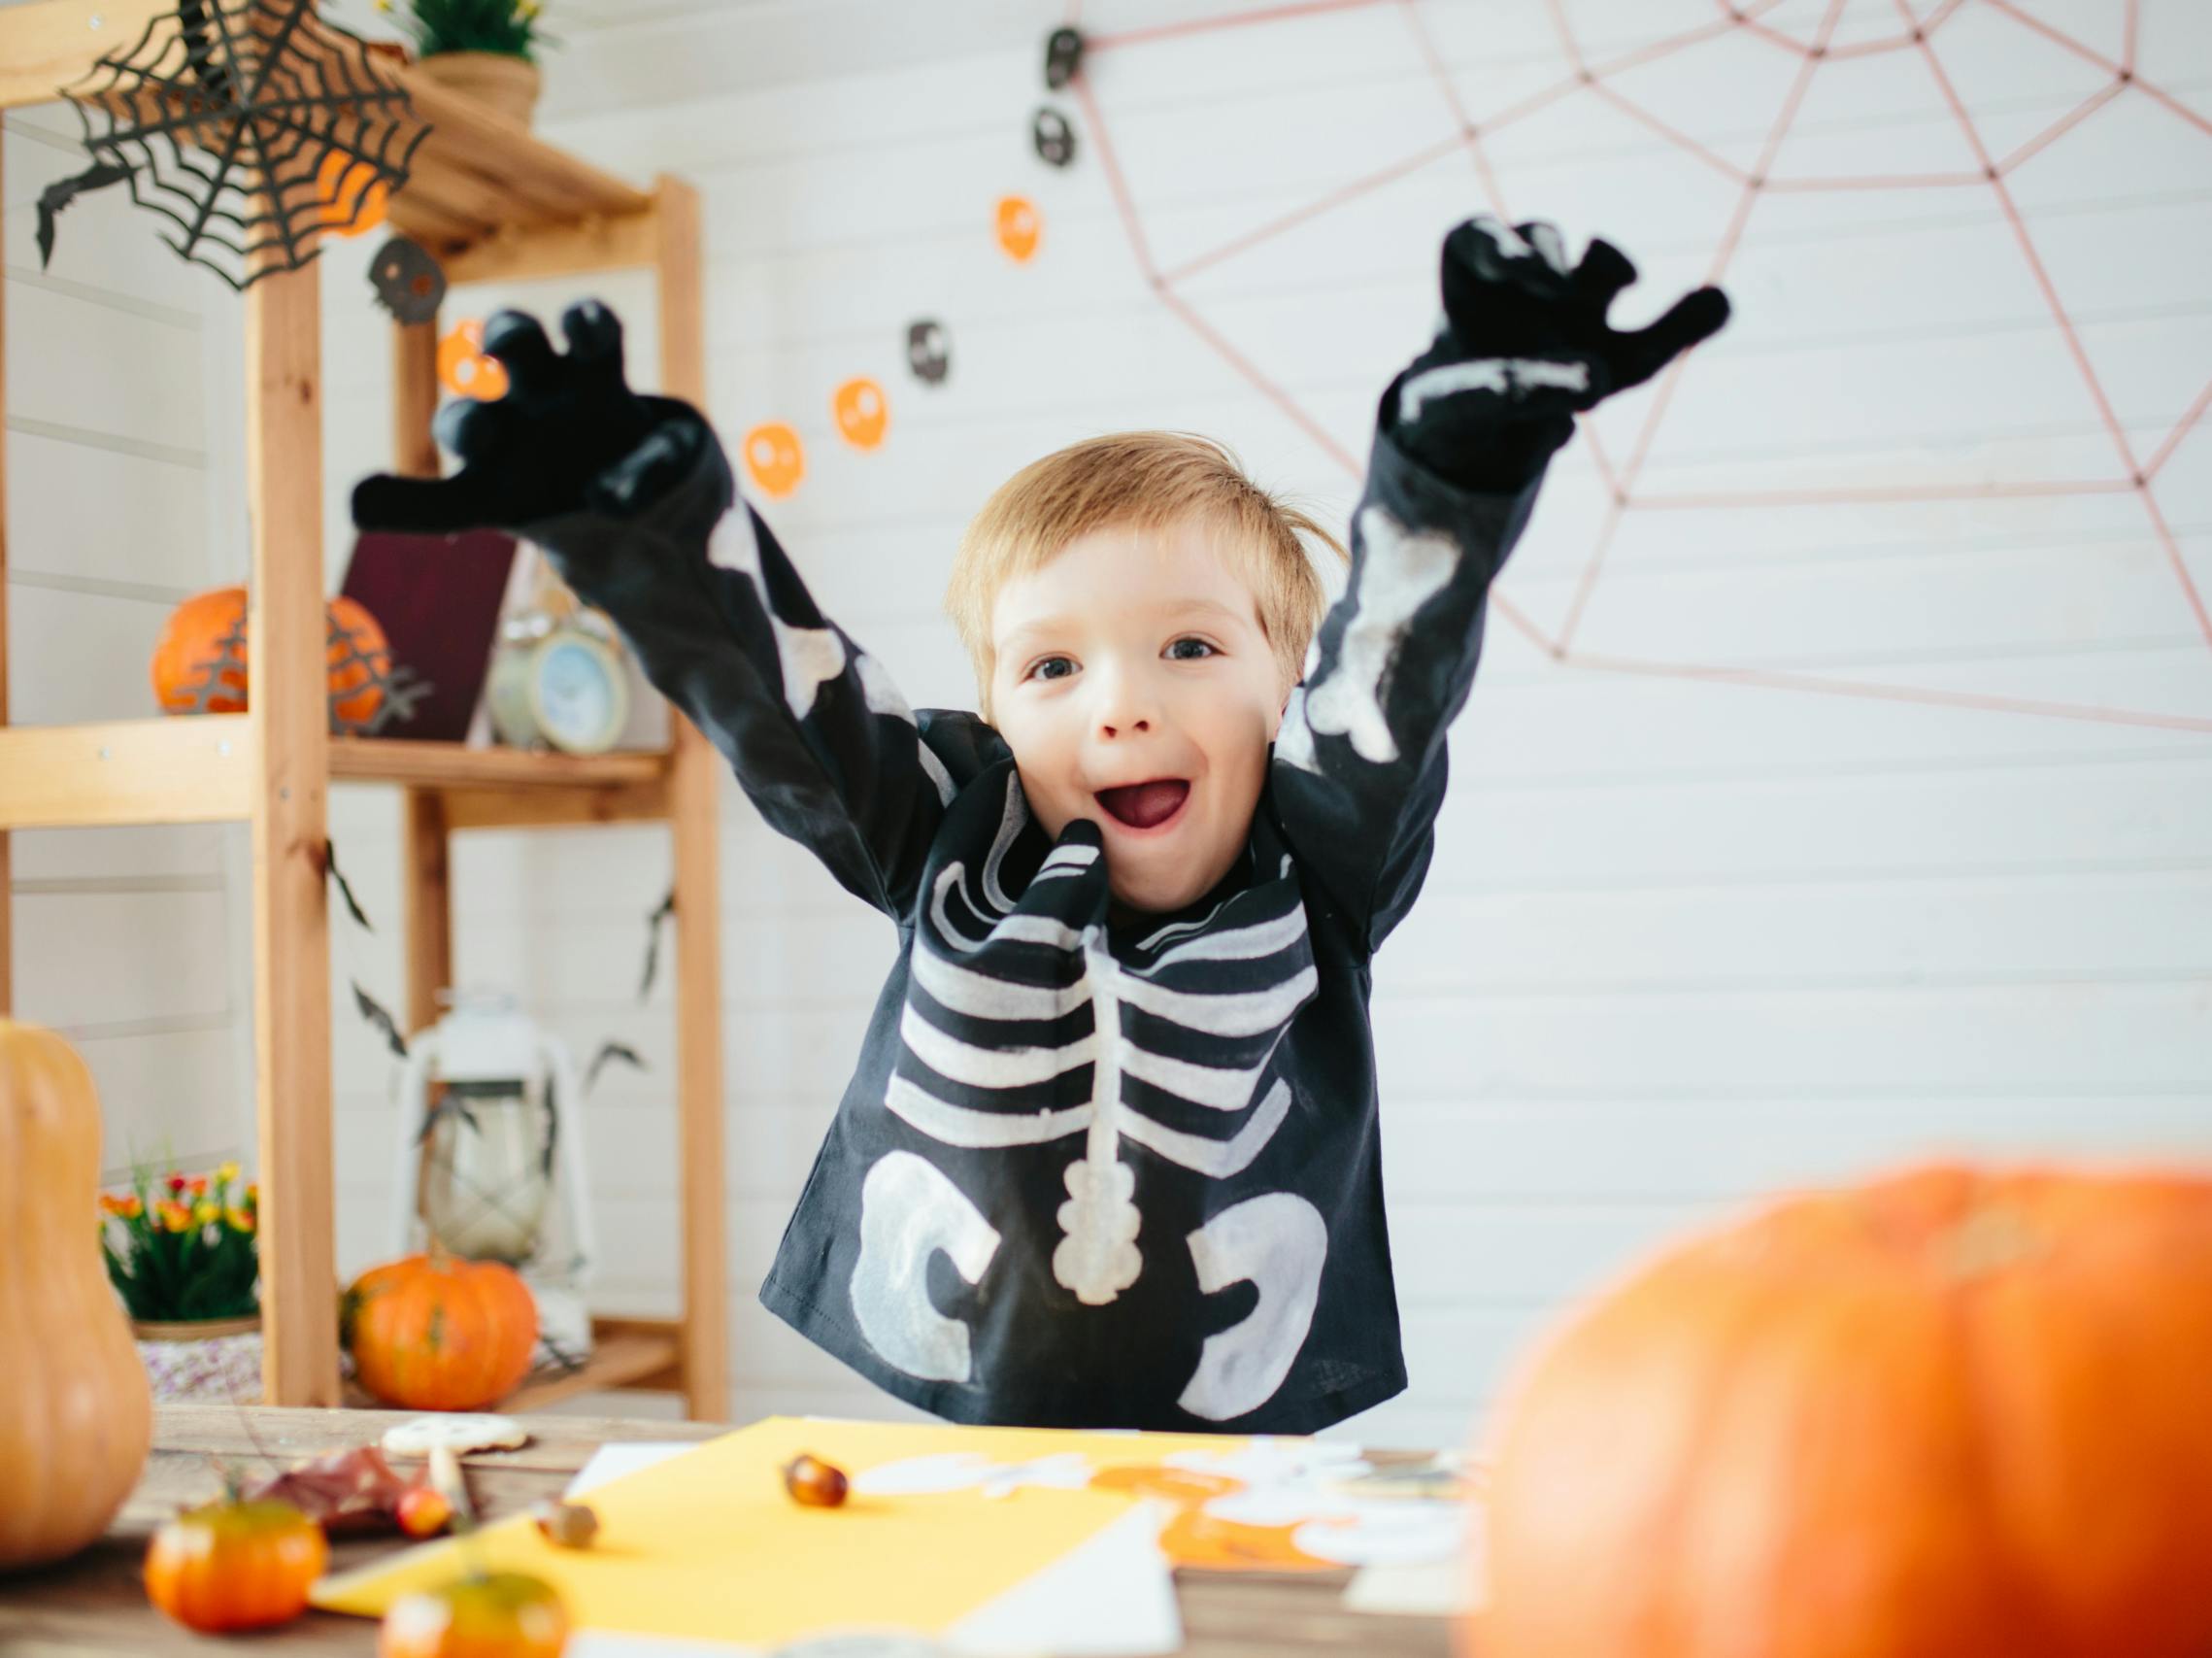 A little boy dressed as a skeleton making a funny face